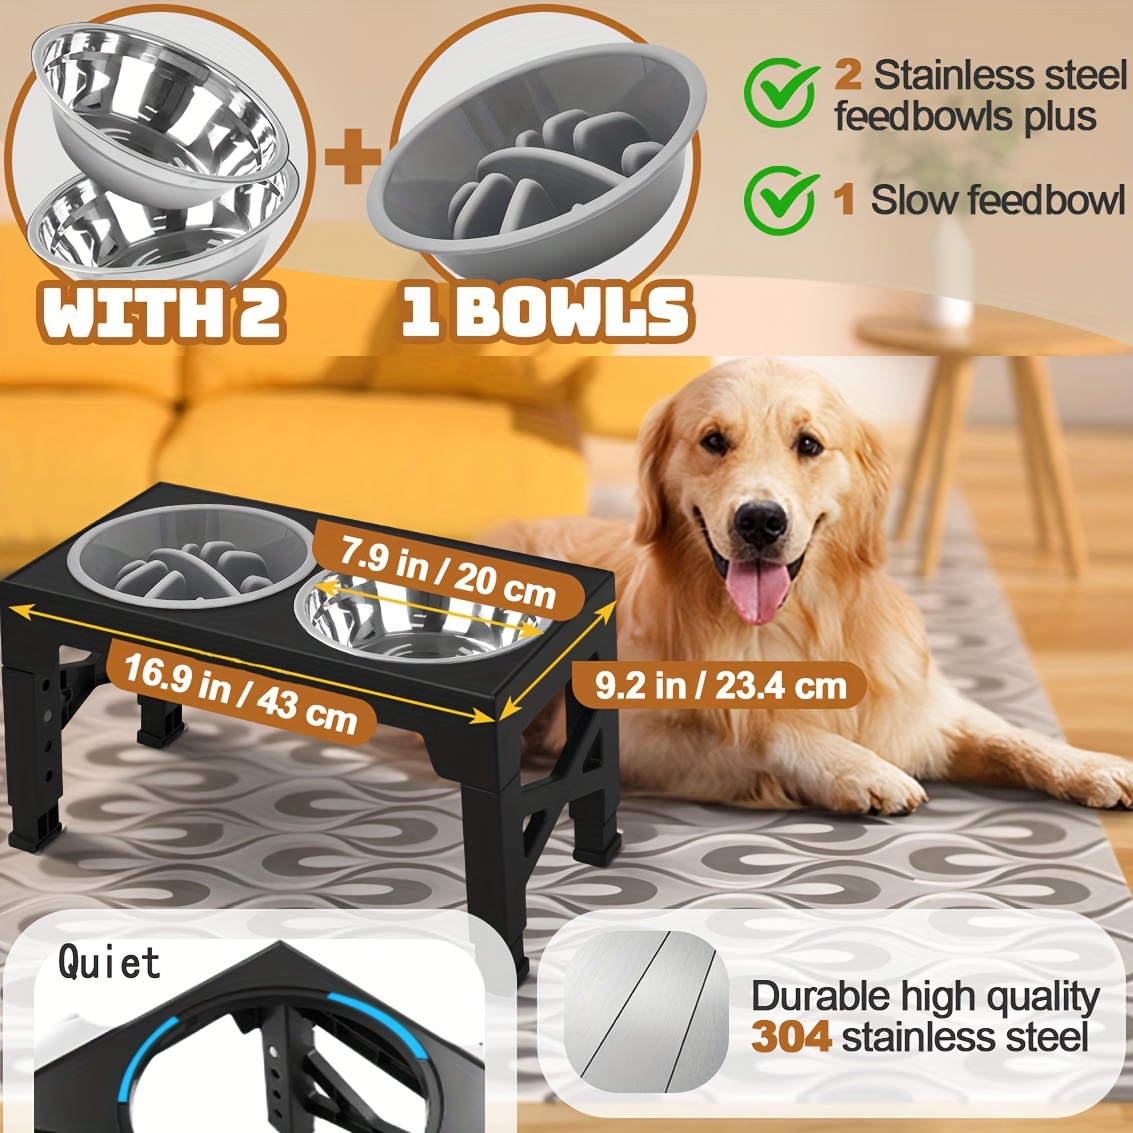 

Elevated Dog Bowls, Dog Feeder Station With 2 Stainless Steel Bowls &1 Slow Feeder Dog Bowls, 5 Heights Adjustable Raised Dog Bowls Stand For Small Medium Large Dogs